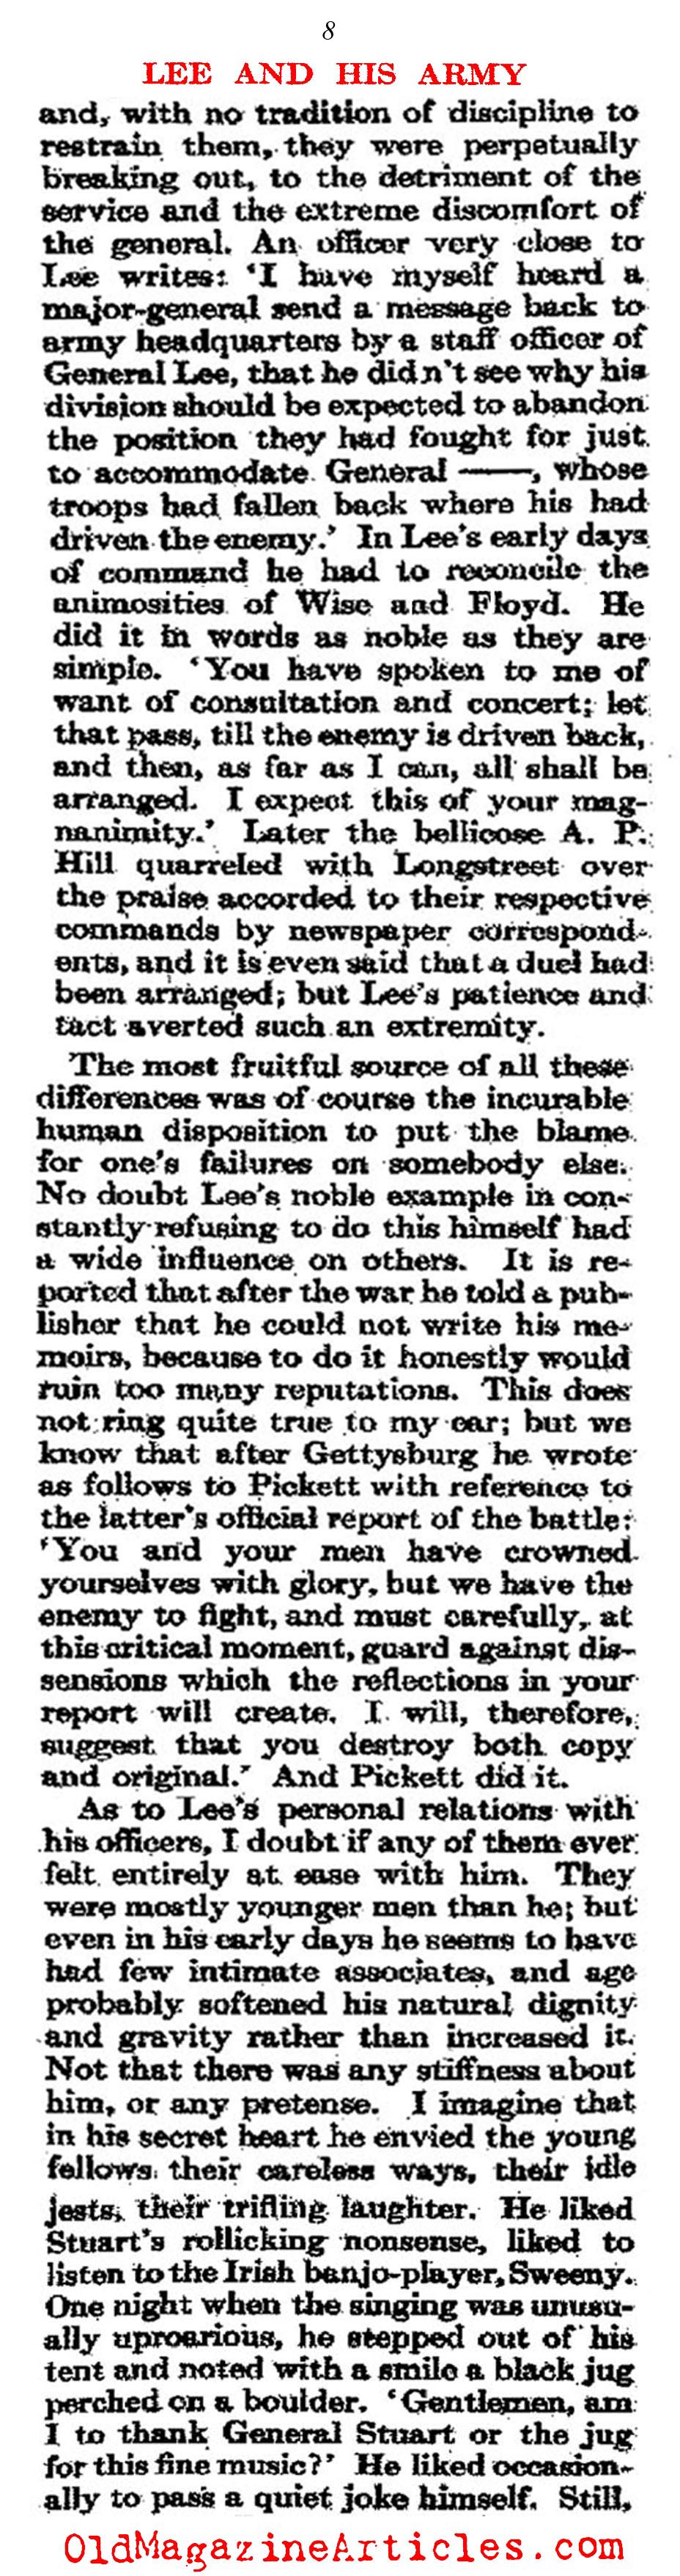 General Lee's Unique Bond with his Army  (Atlantic Monthly, 1911)